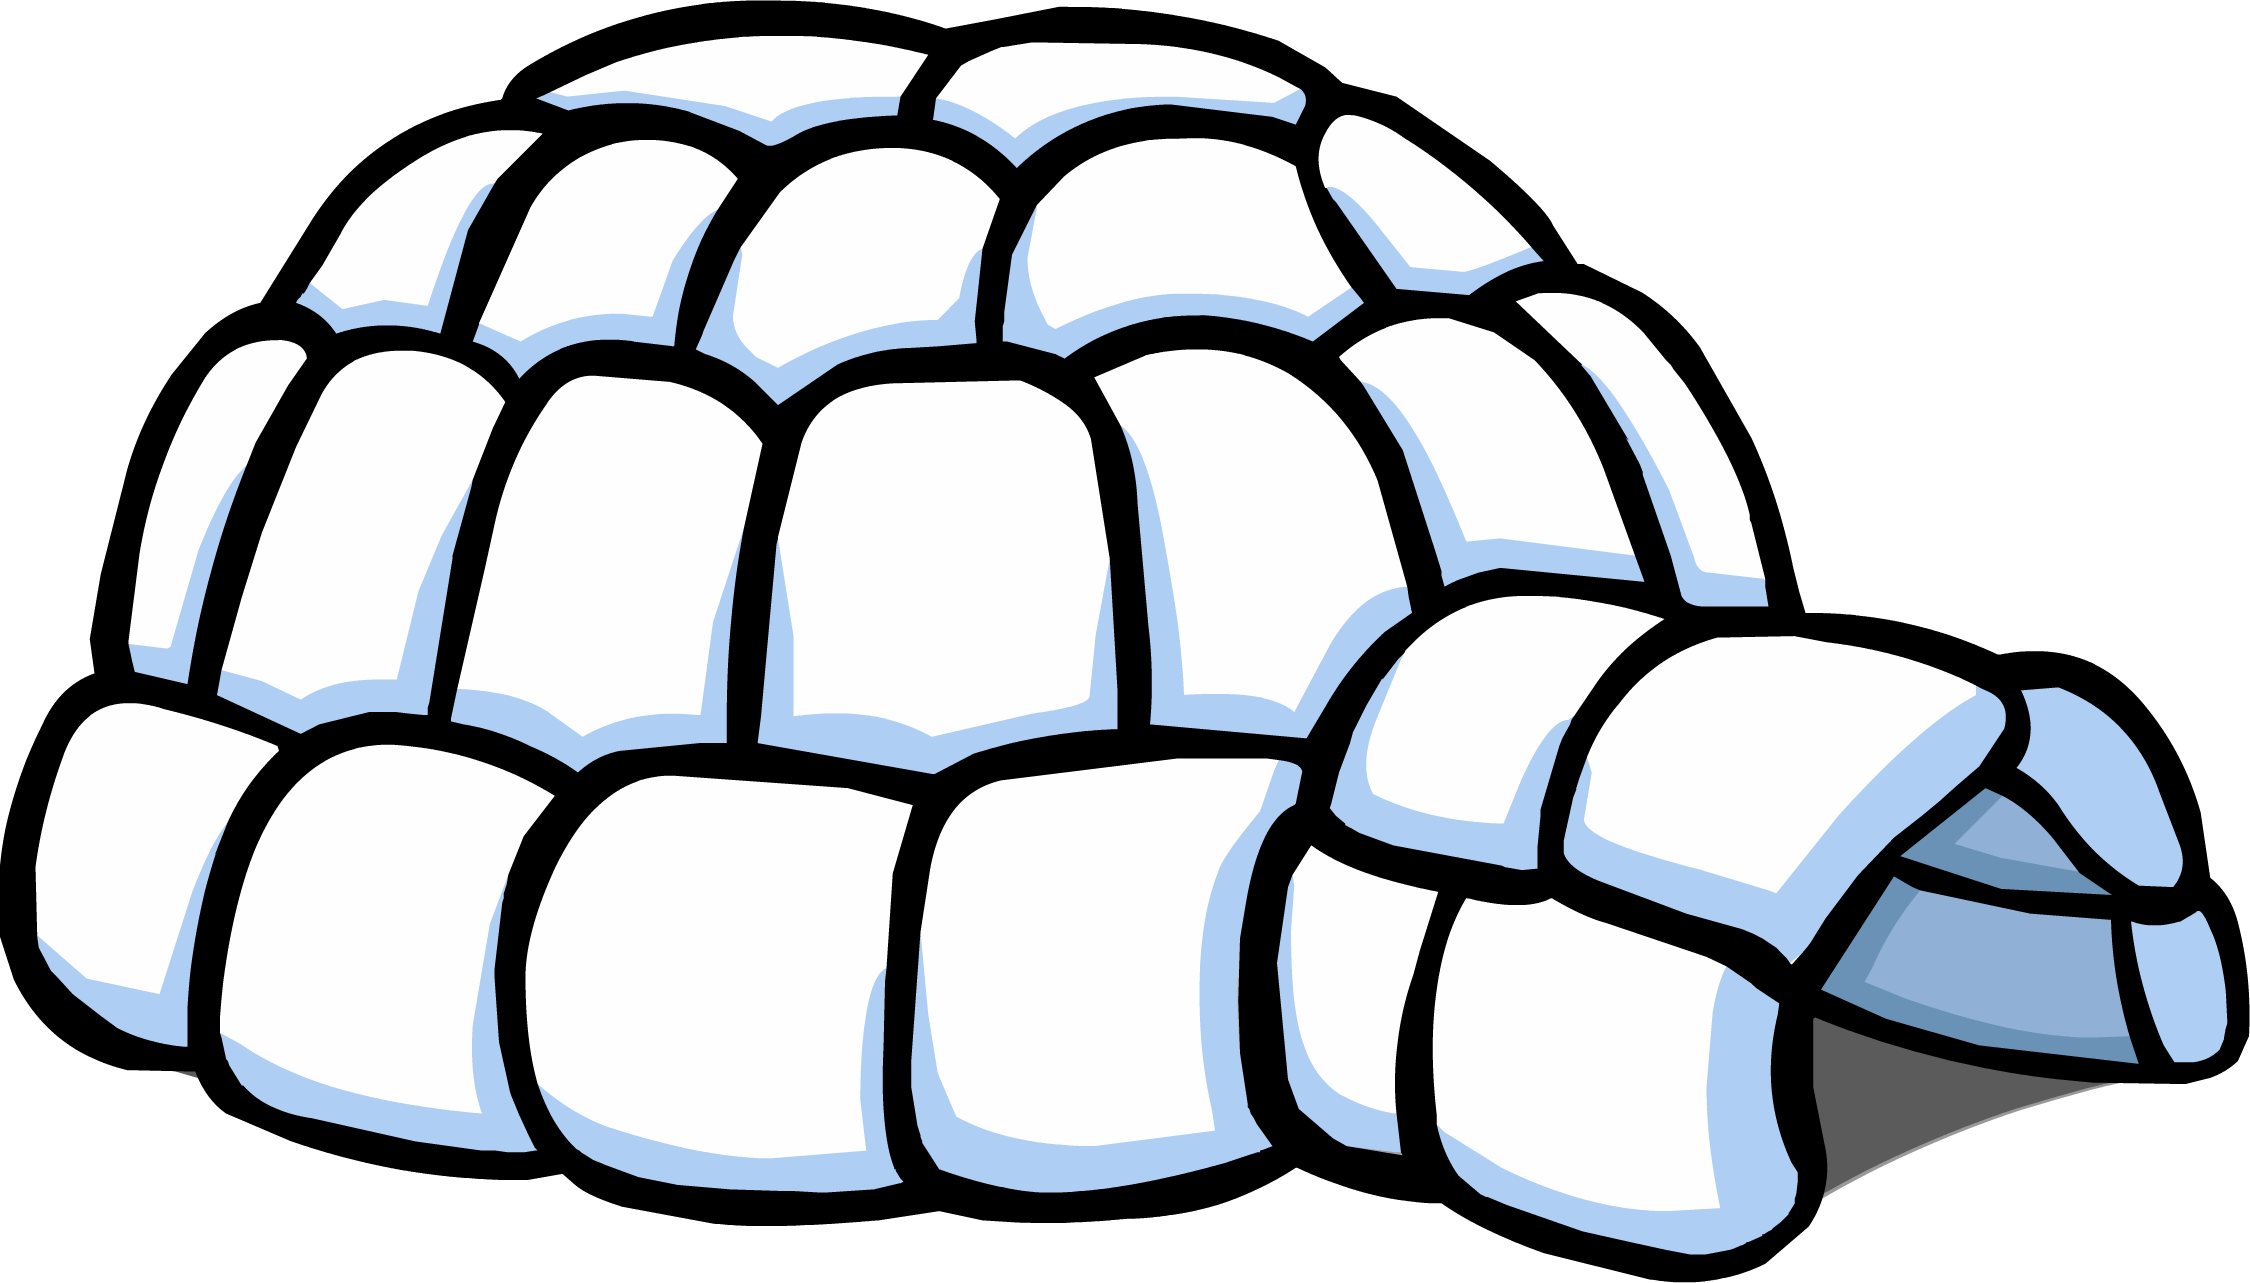 Igloo Vector PNG Free File Descarga | PNG Play